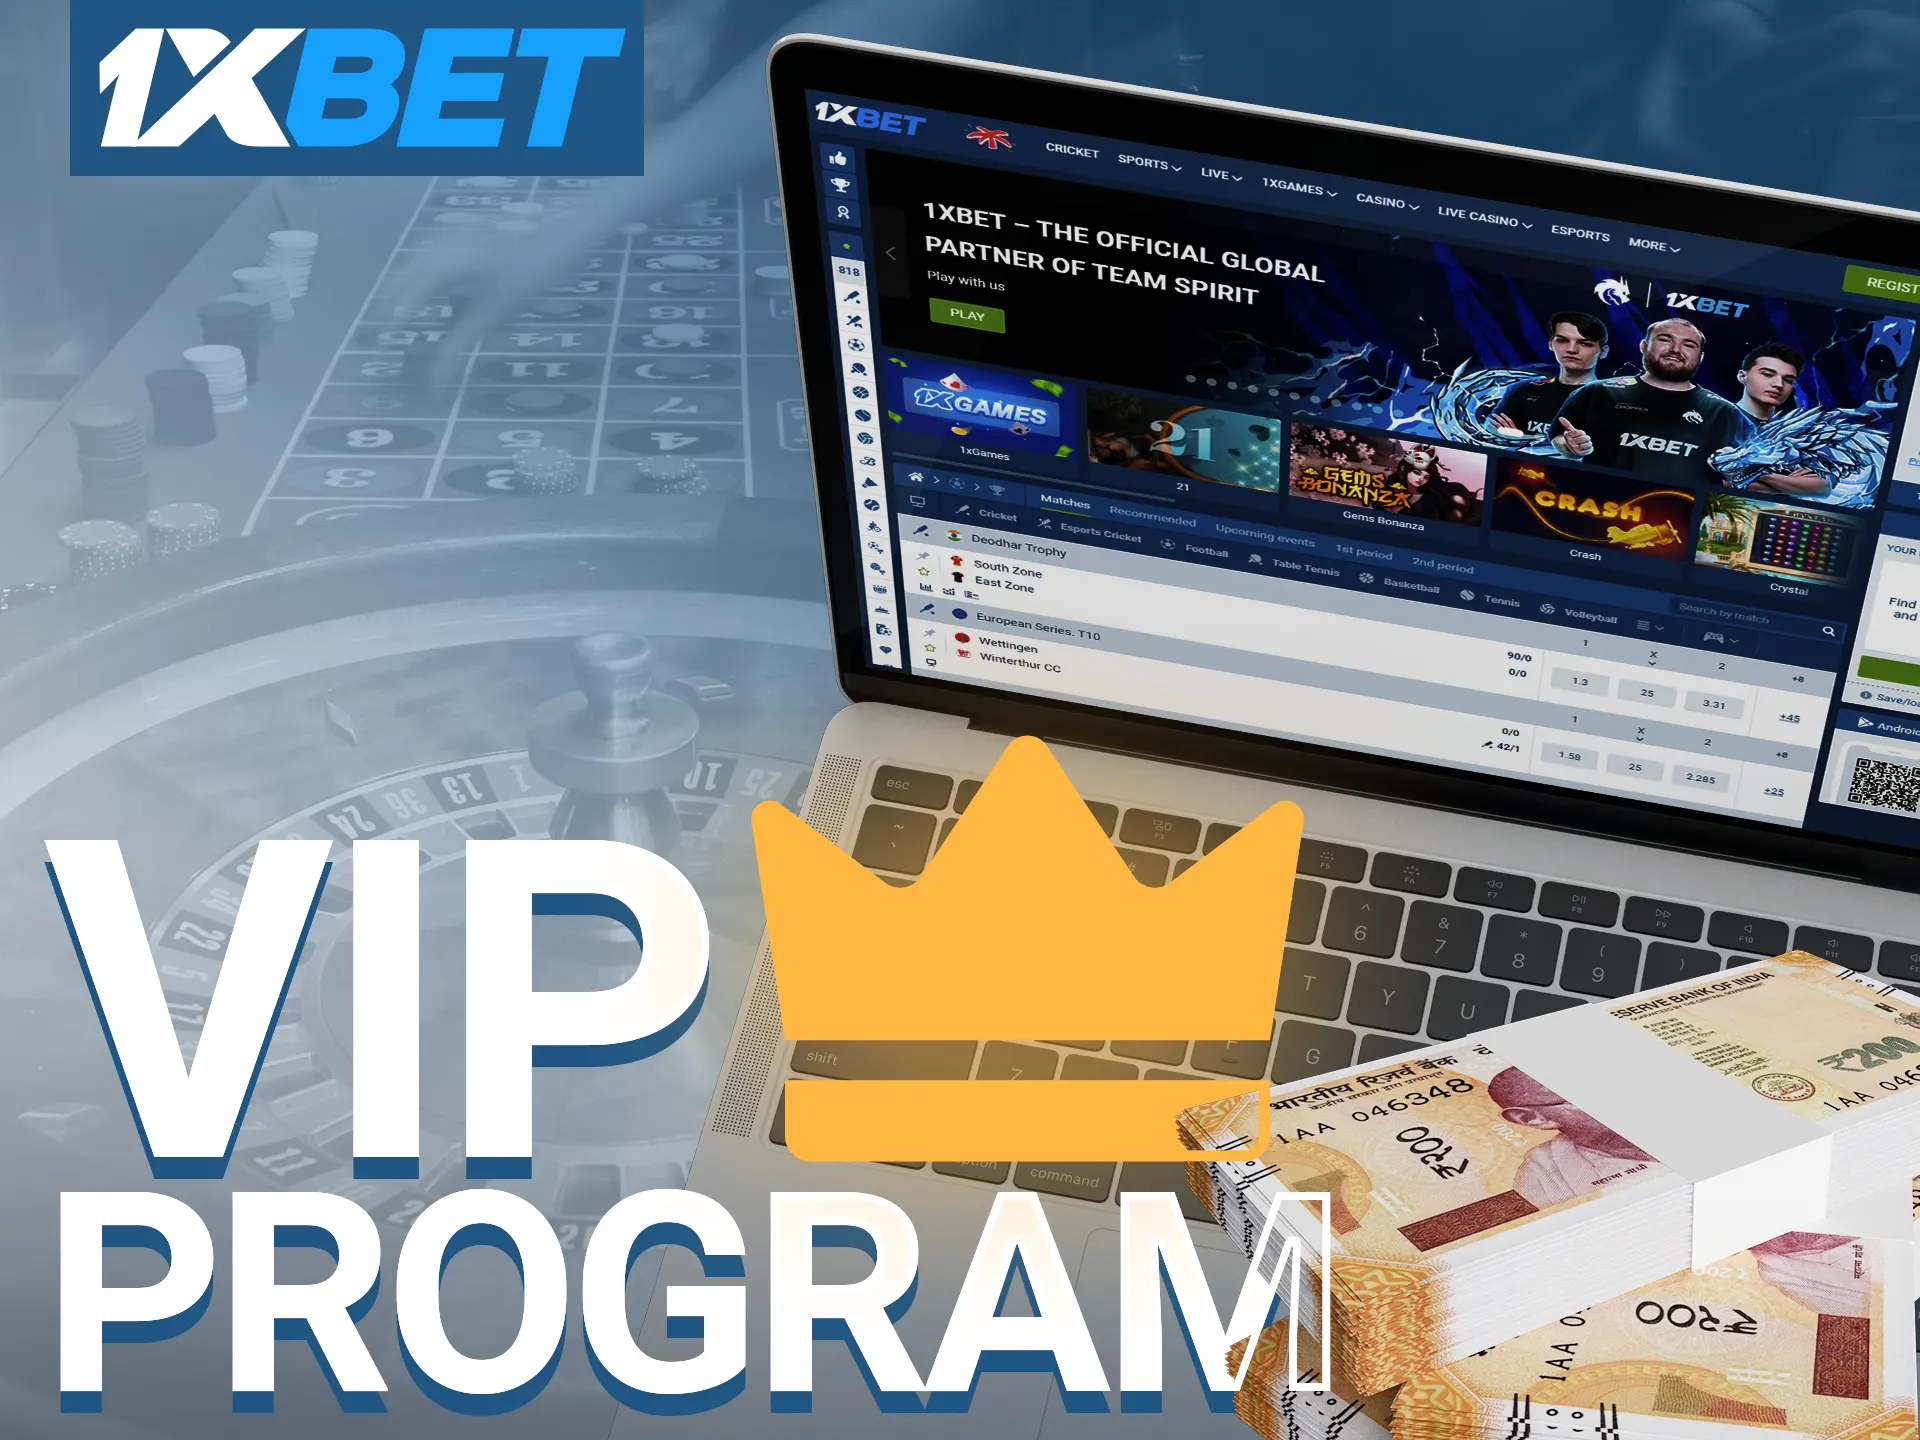 Members of the VIP program receive special benefits including better odds and cashback.